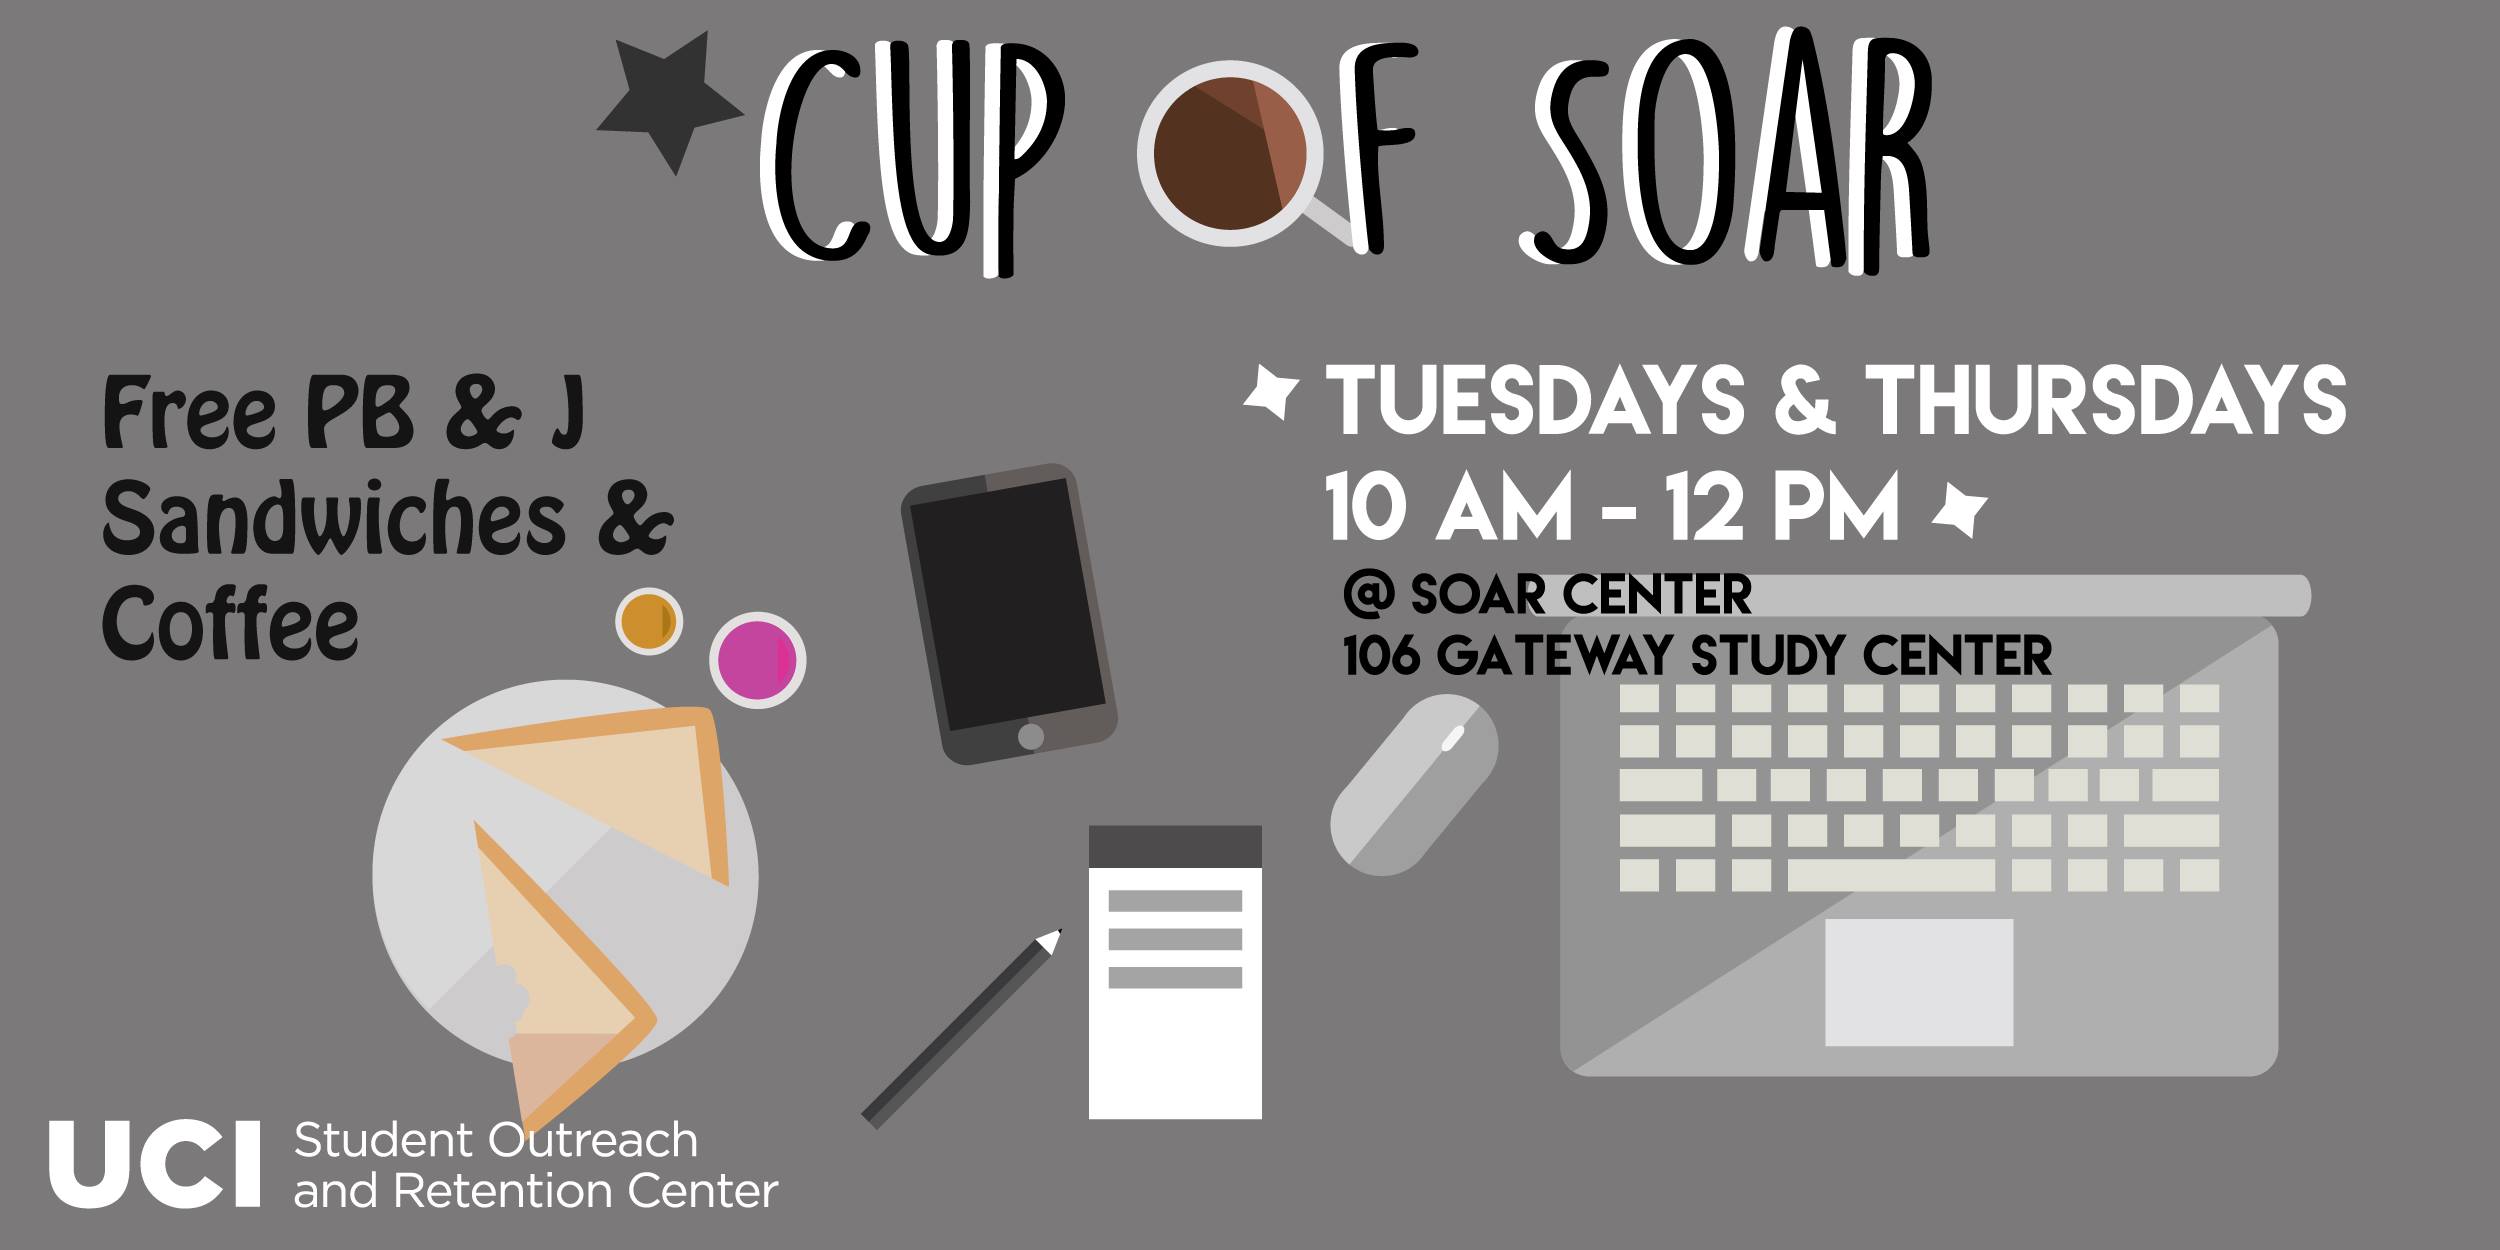 UCI SOAR Cup of SOAR event poster.